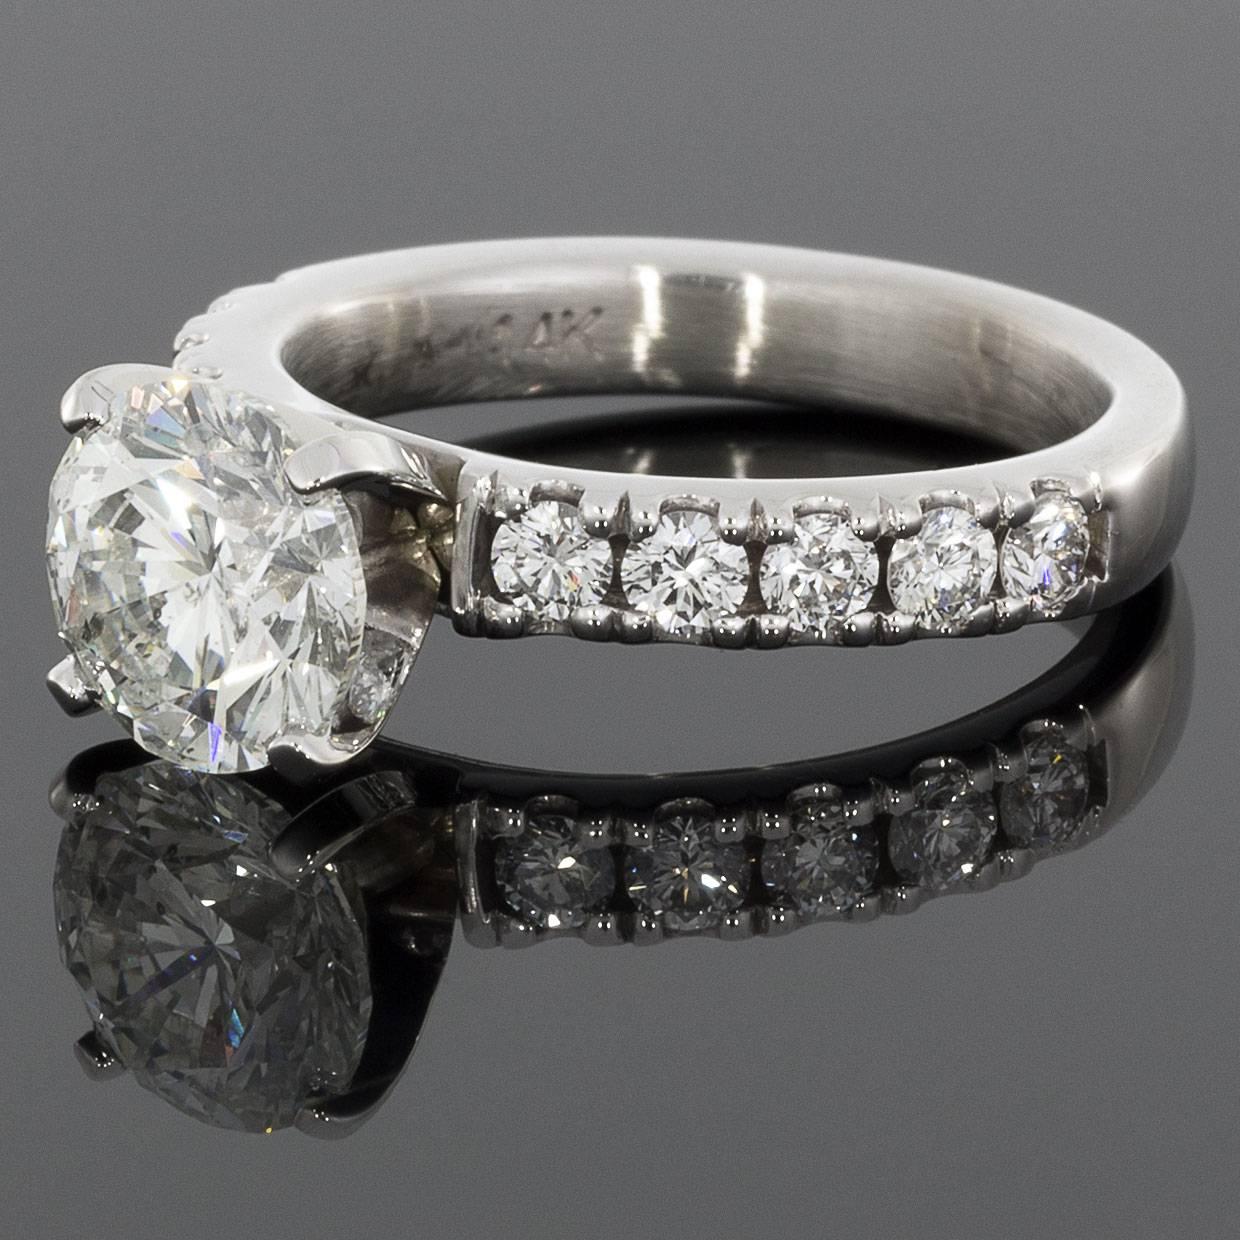 This lovely, classically styled engagement ring makes a stunning statement. Prominently & elegantly showcased in a 4 prong setting, the center diamond is a beautiful 2.19 carat round brilliant cut diamond that is GIA certified as H/I1 in